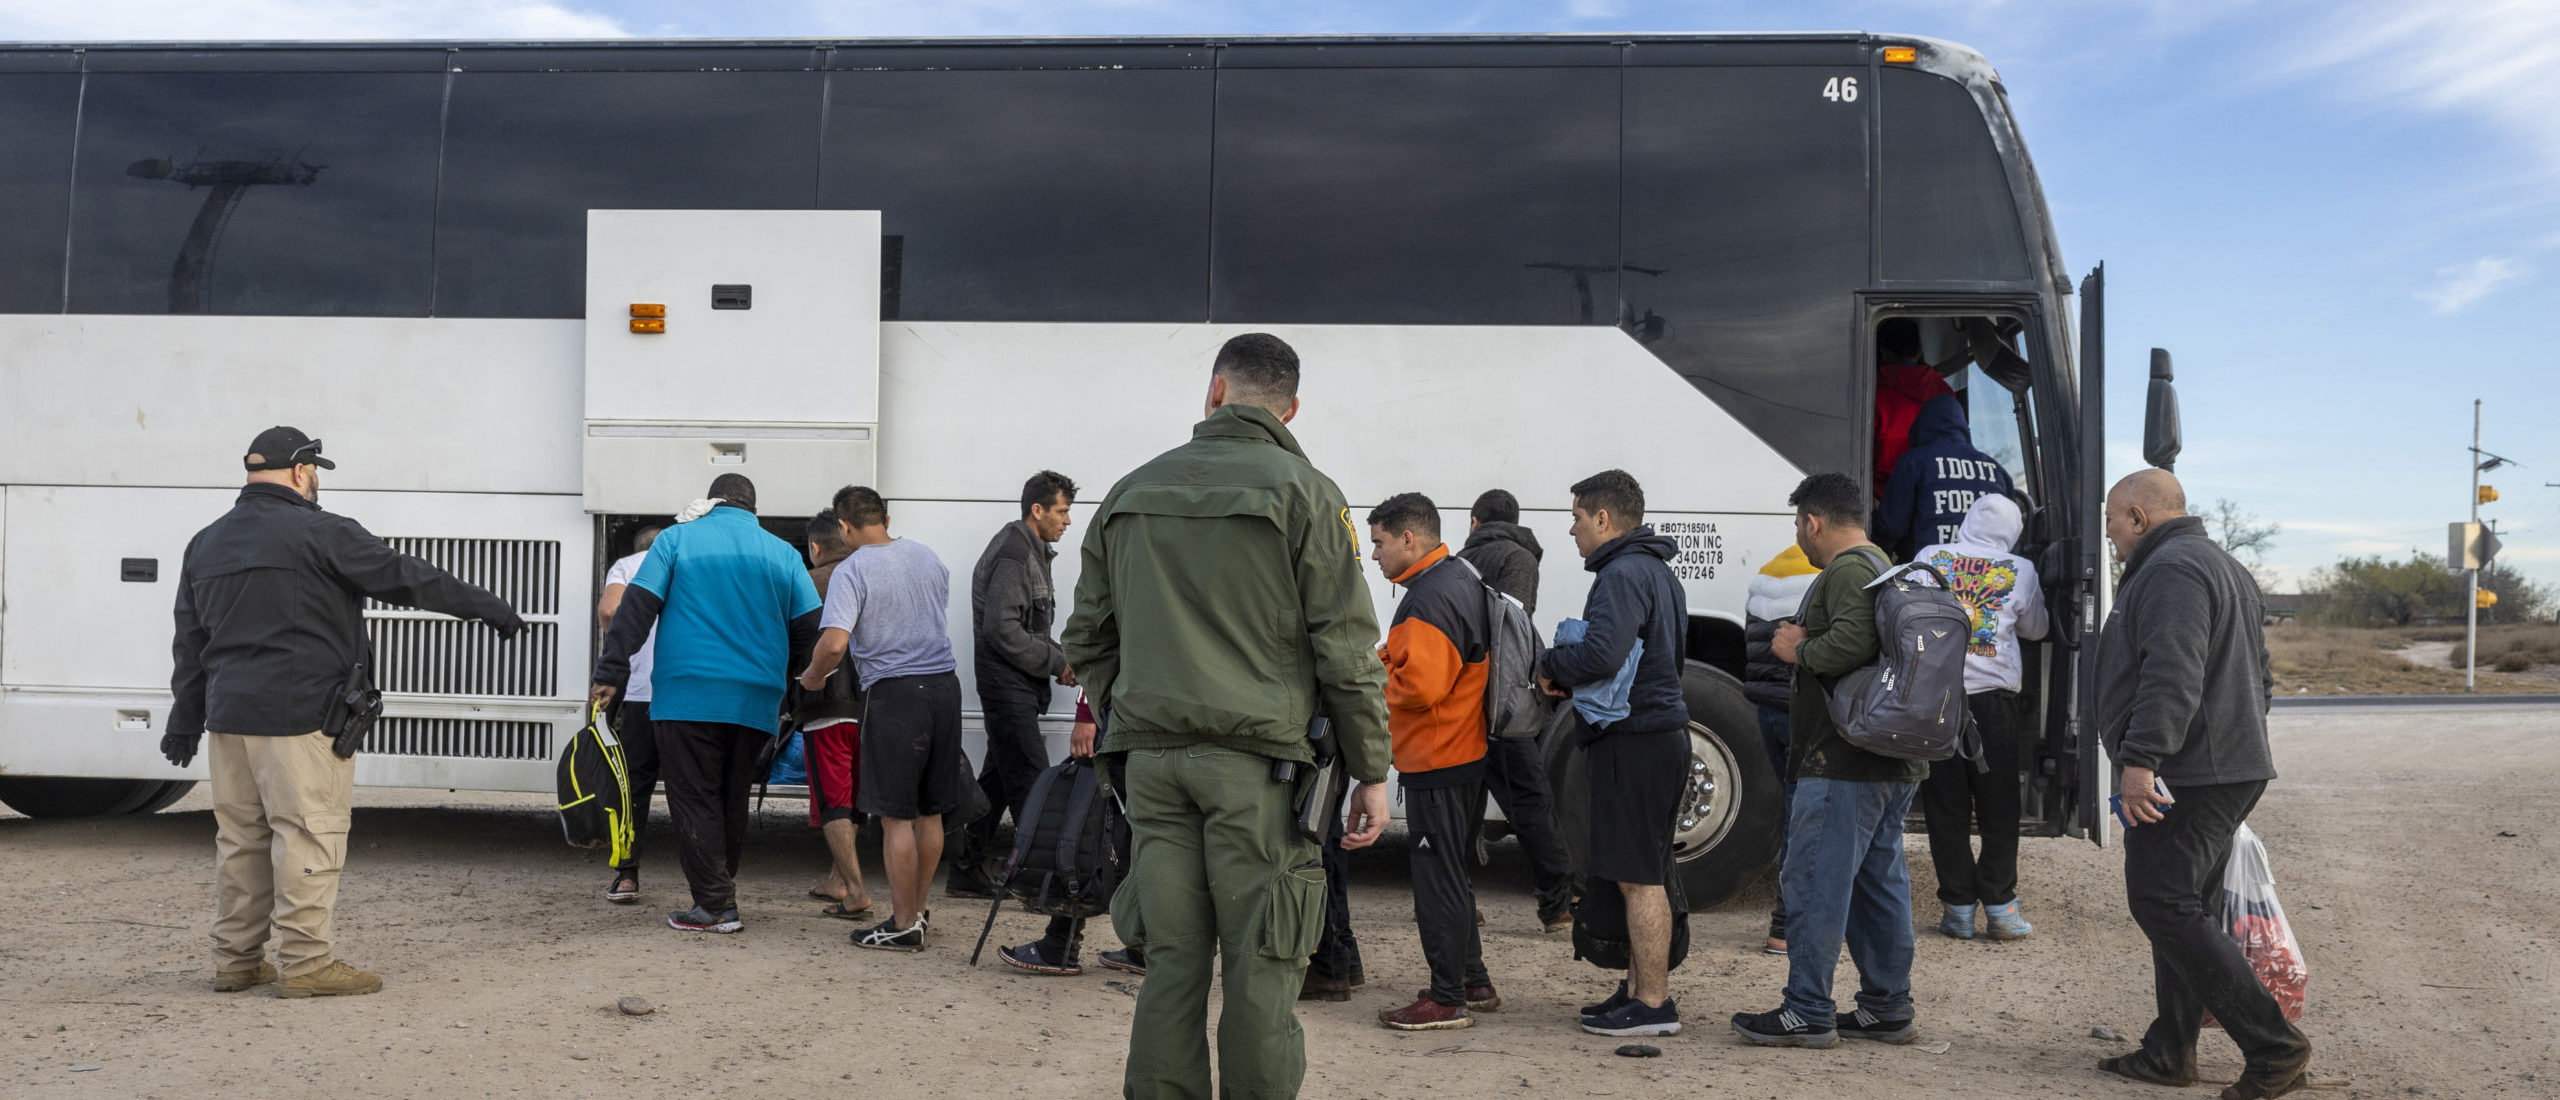 EAGLE PASS, TEXAS - JANUARY 07: Immigrants file into a U.S. Customs and Border Protection bus after crossing the U.S.-Mexico border on January 07, 2024 in Eagle Pass, Texas. According the a new report released by U.S. Department of Homeland Security, some 2.3 million migrants, mostly from families seeking asylum, have been released into the U.S. under the Biden Administration since 2021. (Photo by John Moore/Getty Images)